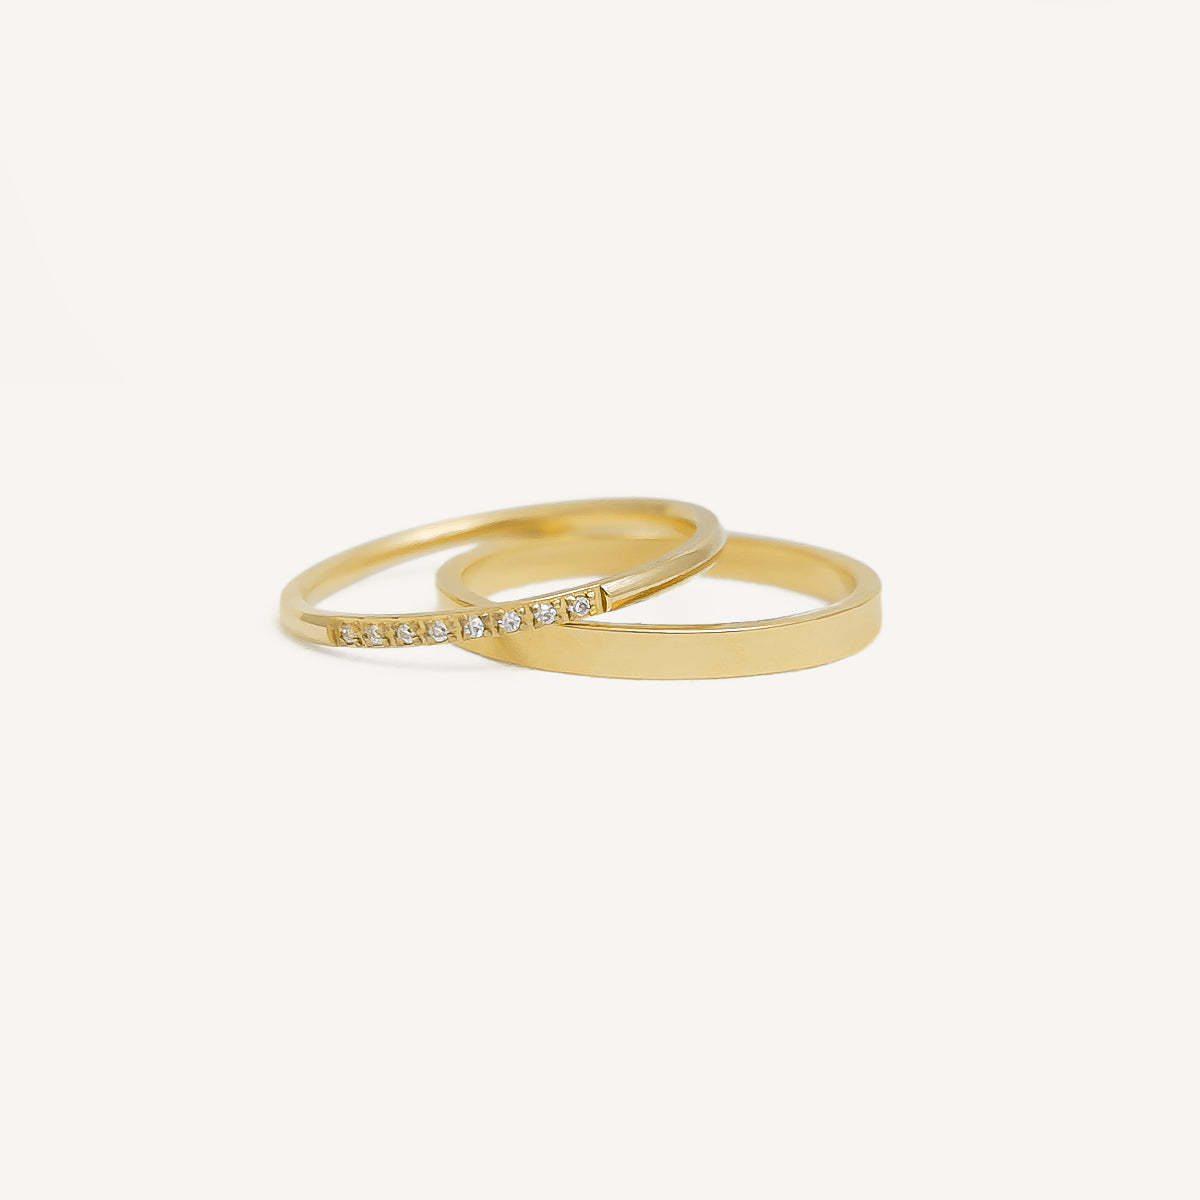 The Half Eternity and Flat Stacker Ring Bundle